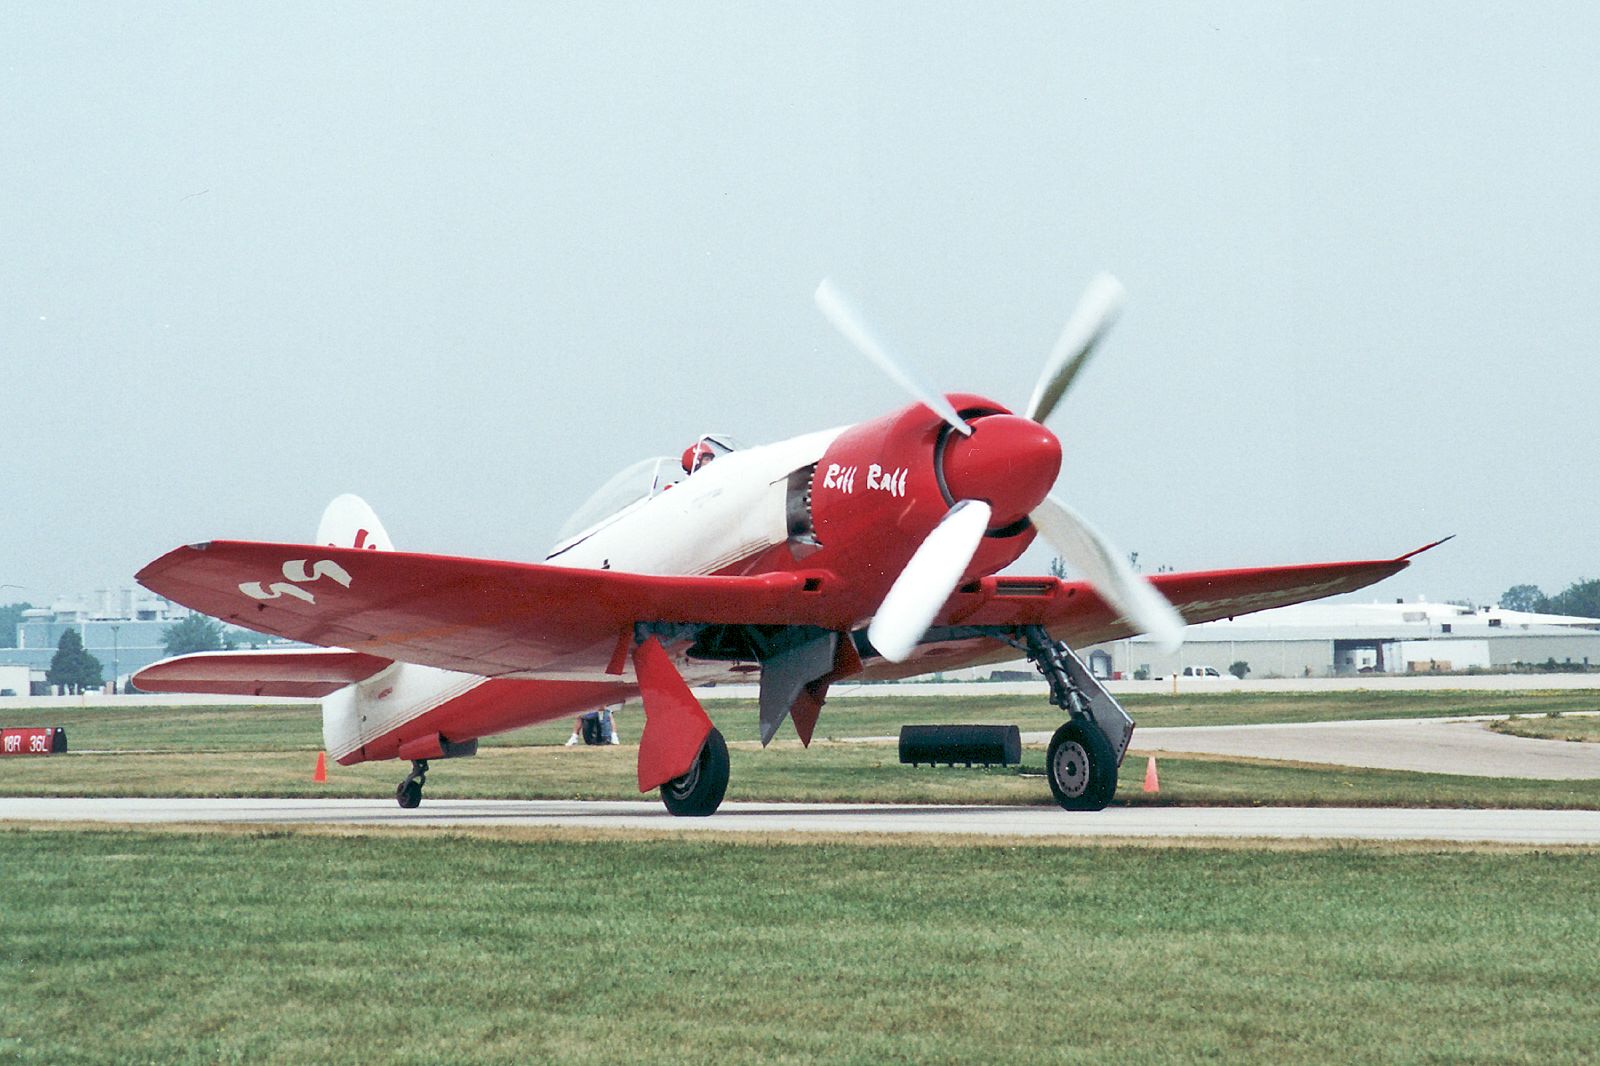 red and white plane at an airport with grass